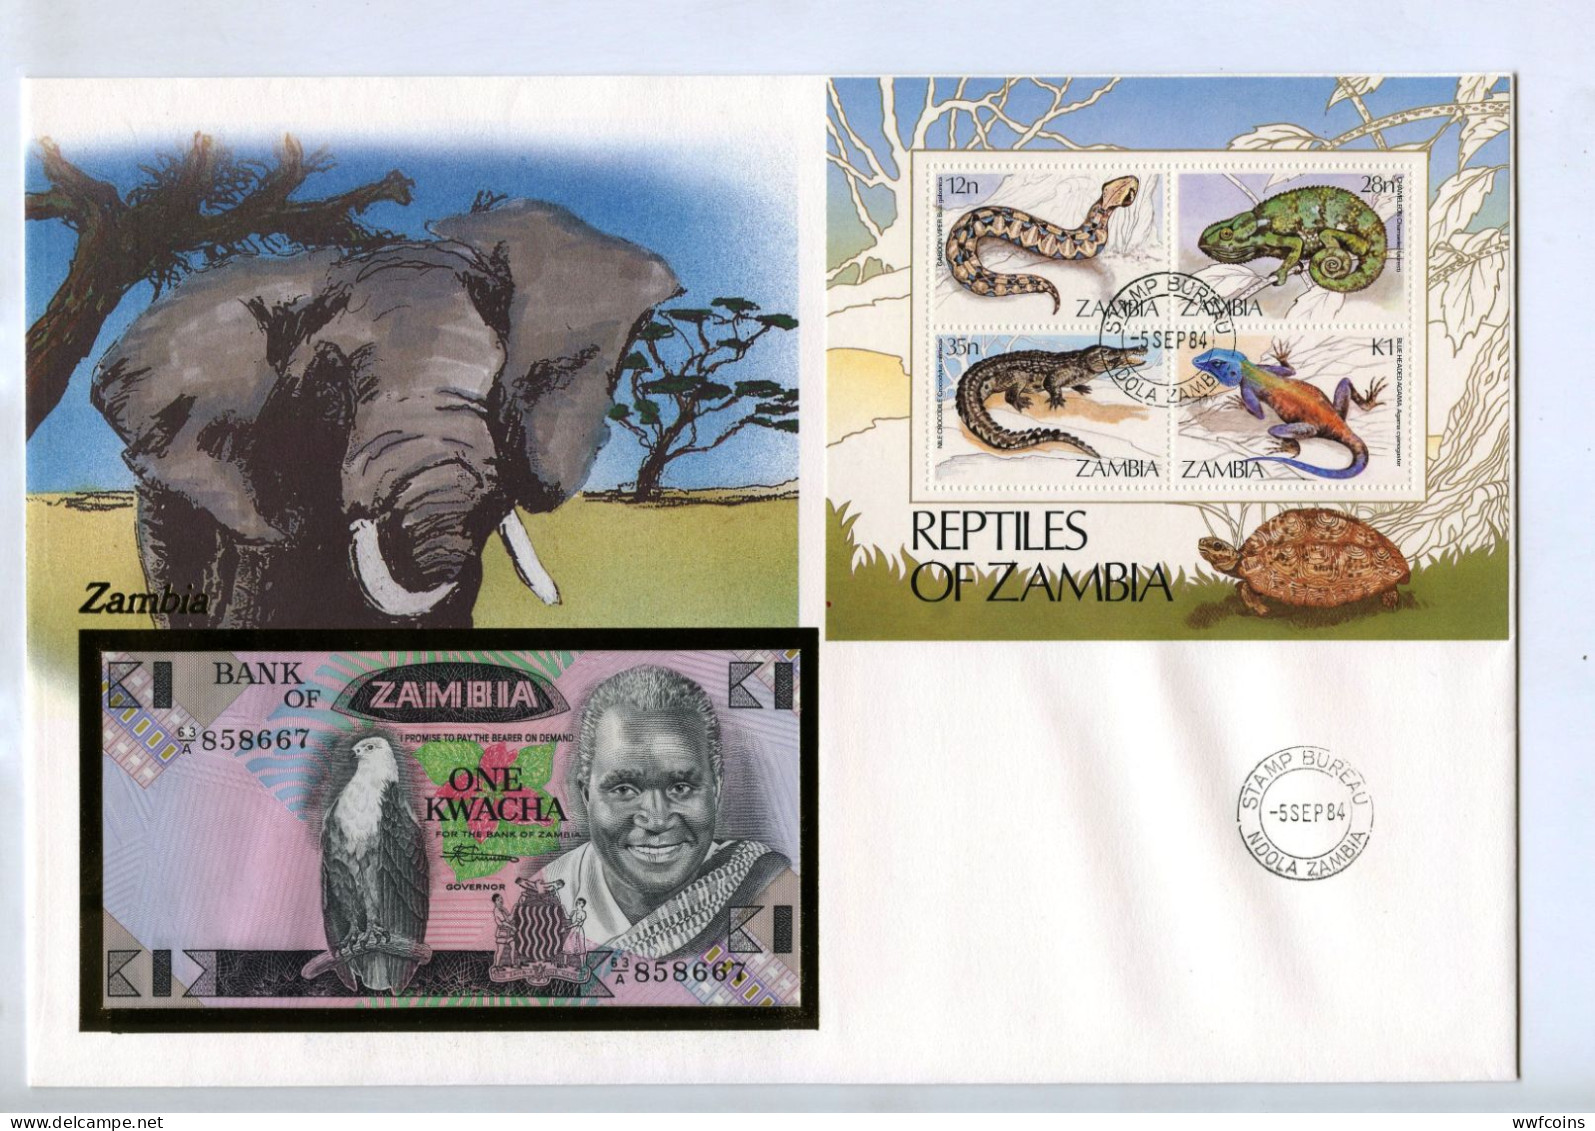 GIANT POSTCARD COMMEMORATIVE ZAMBIA EAGLE FIRST DAY ISSUE SNAKE CAMALEON ELEPHANT FDS UNC - Zambie